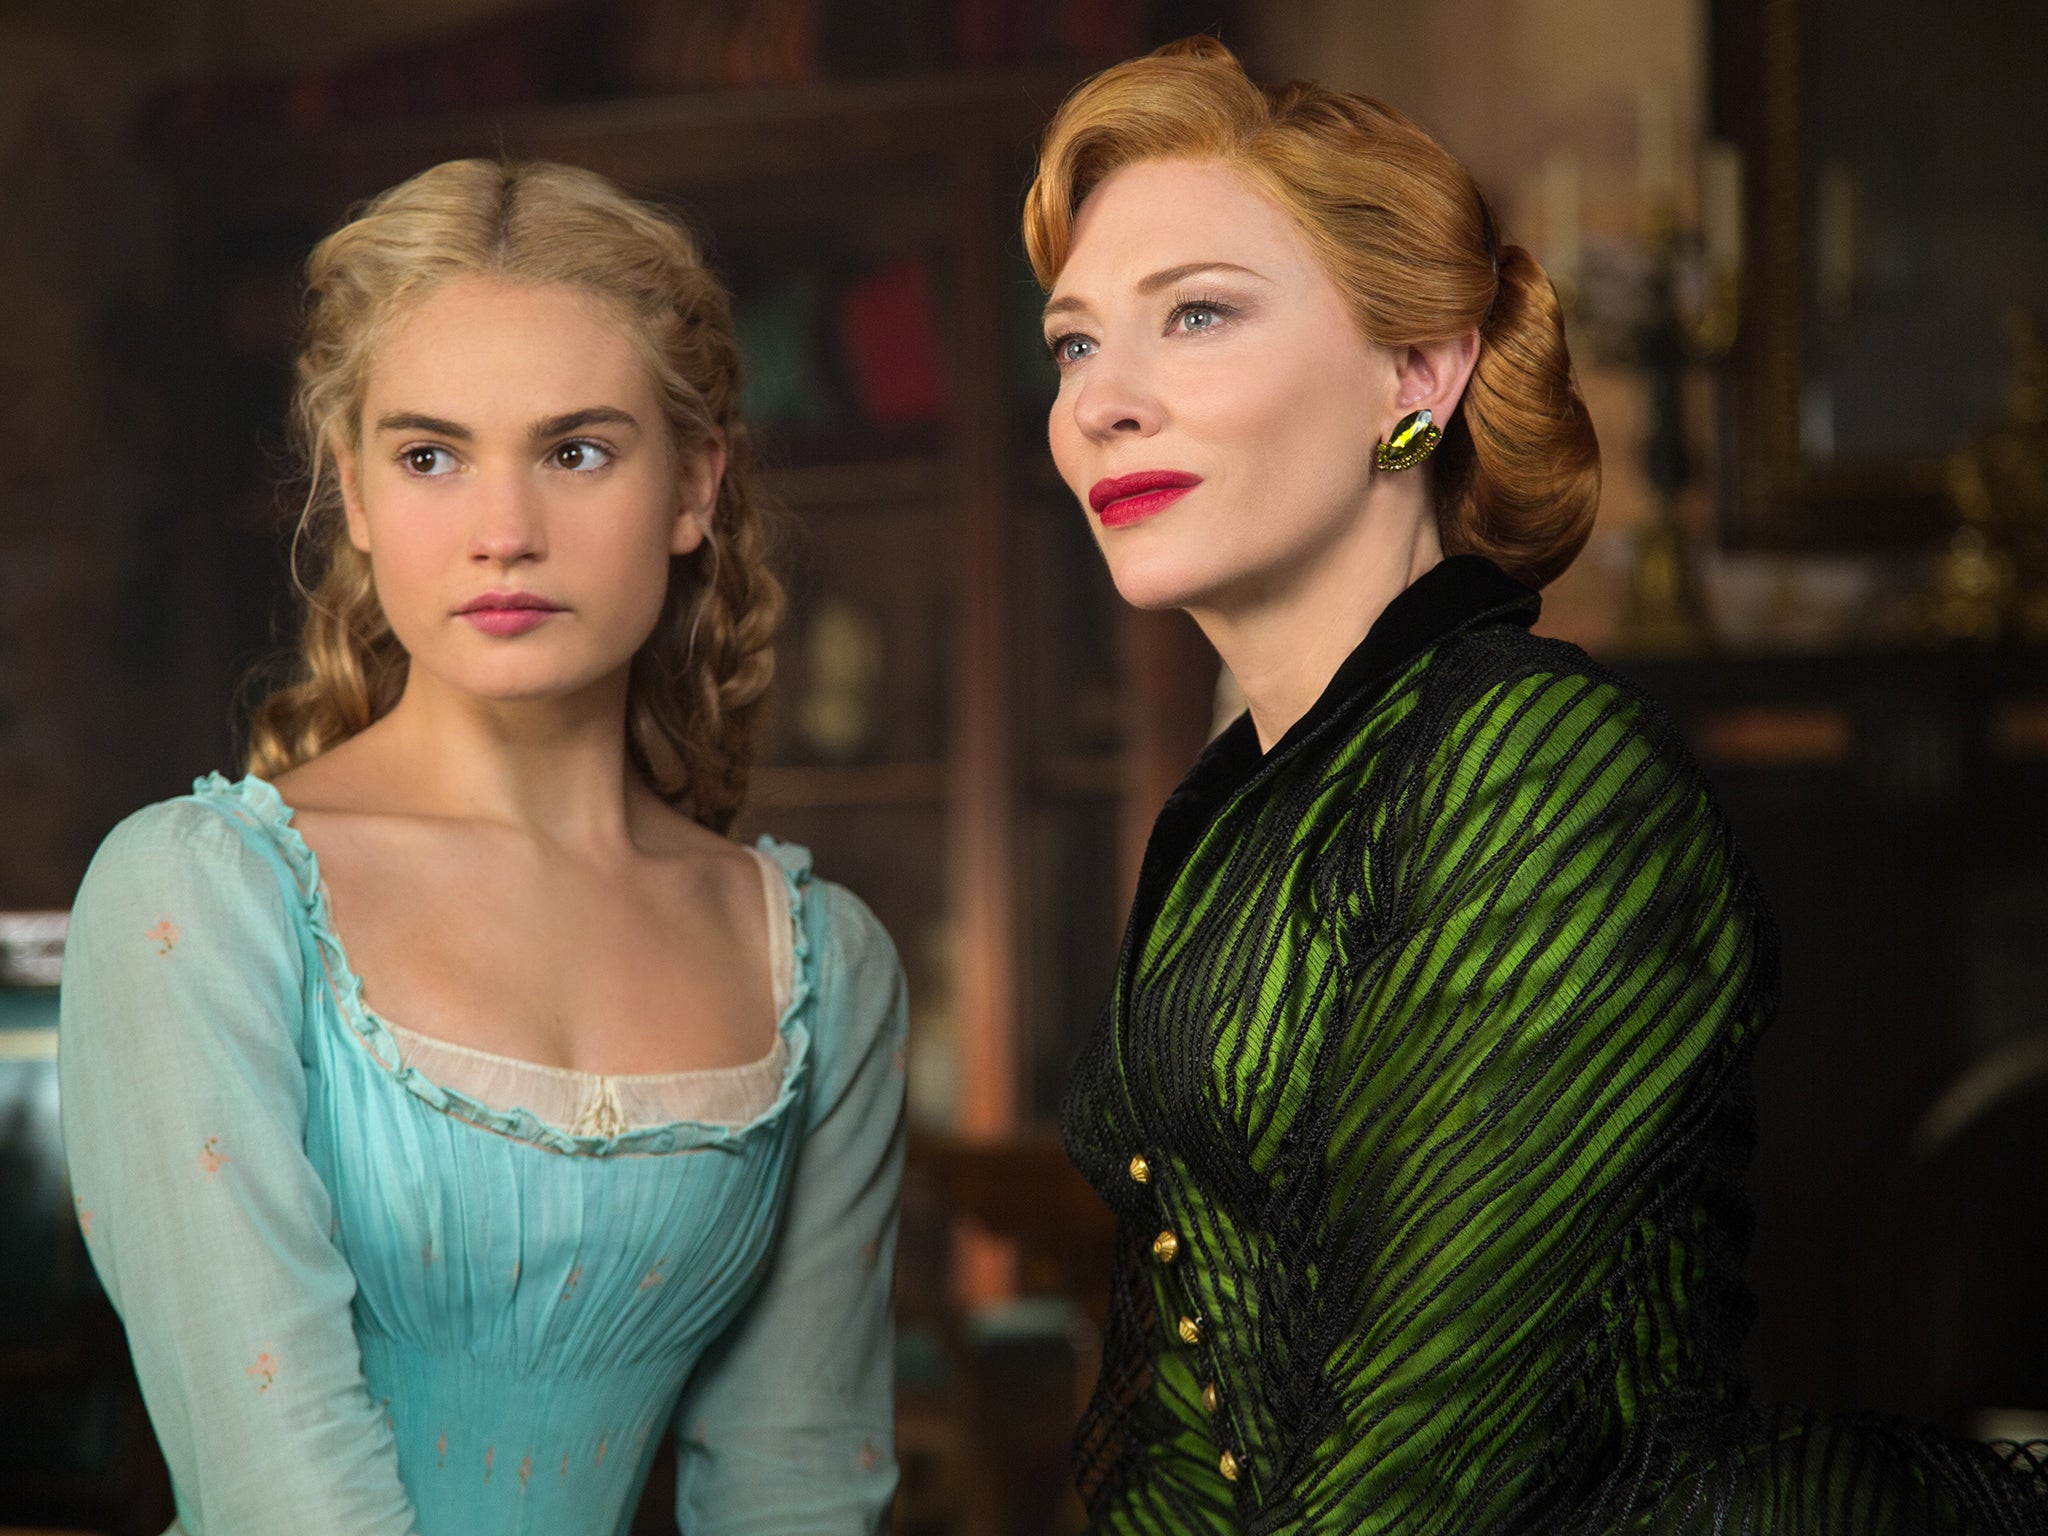 Lily James as Cinderella (left) with Cate Blanchett as the
wicked stepmother in the new live-action Disney film